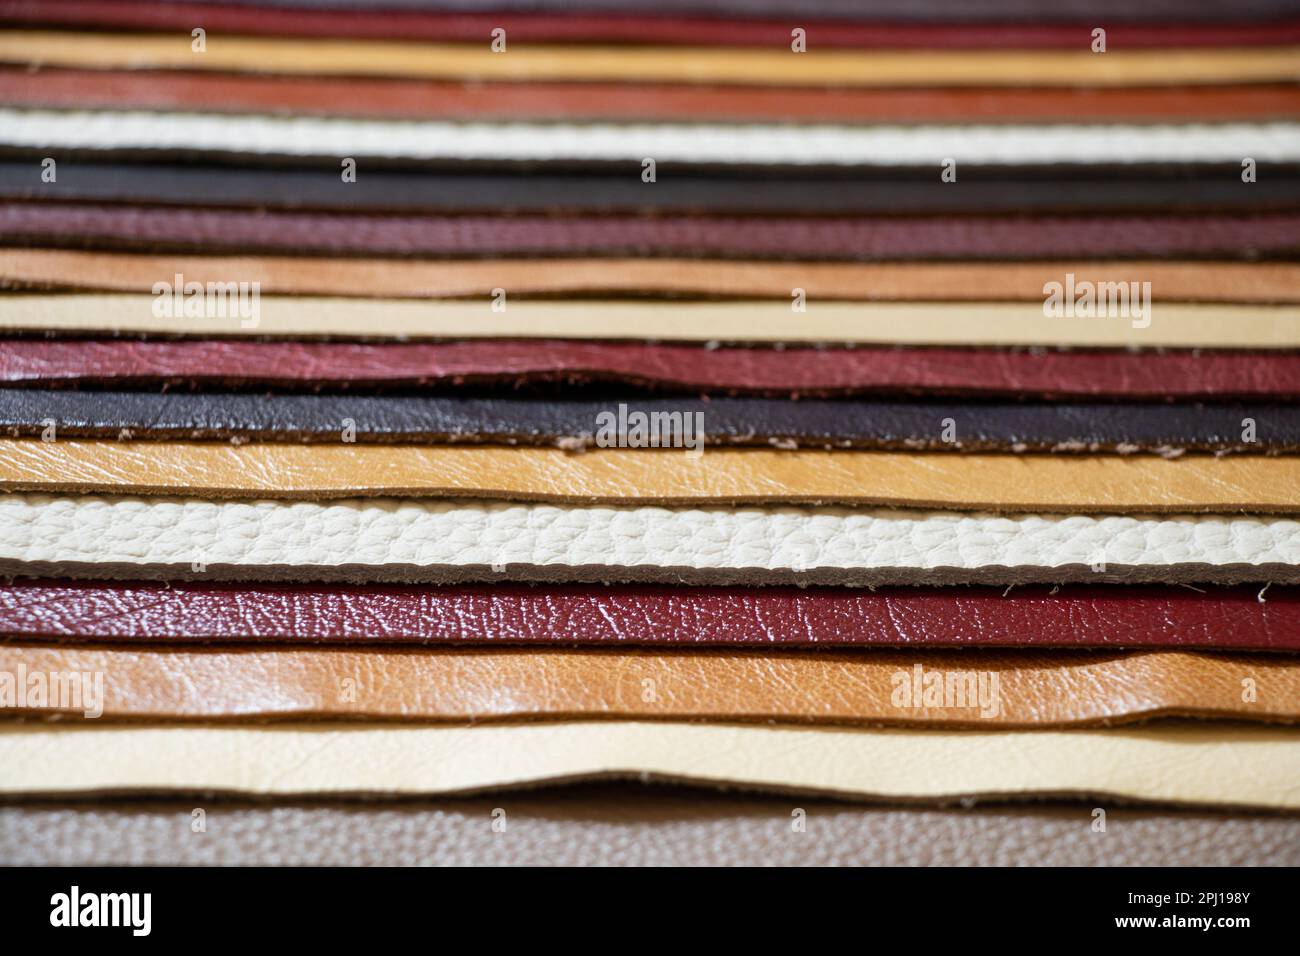 different colors pieces of leather as a background closeup Stock Photo